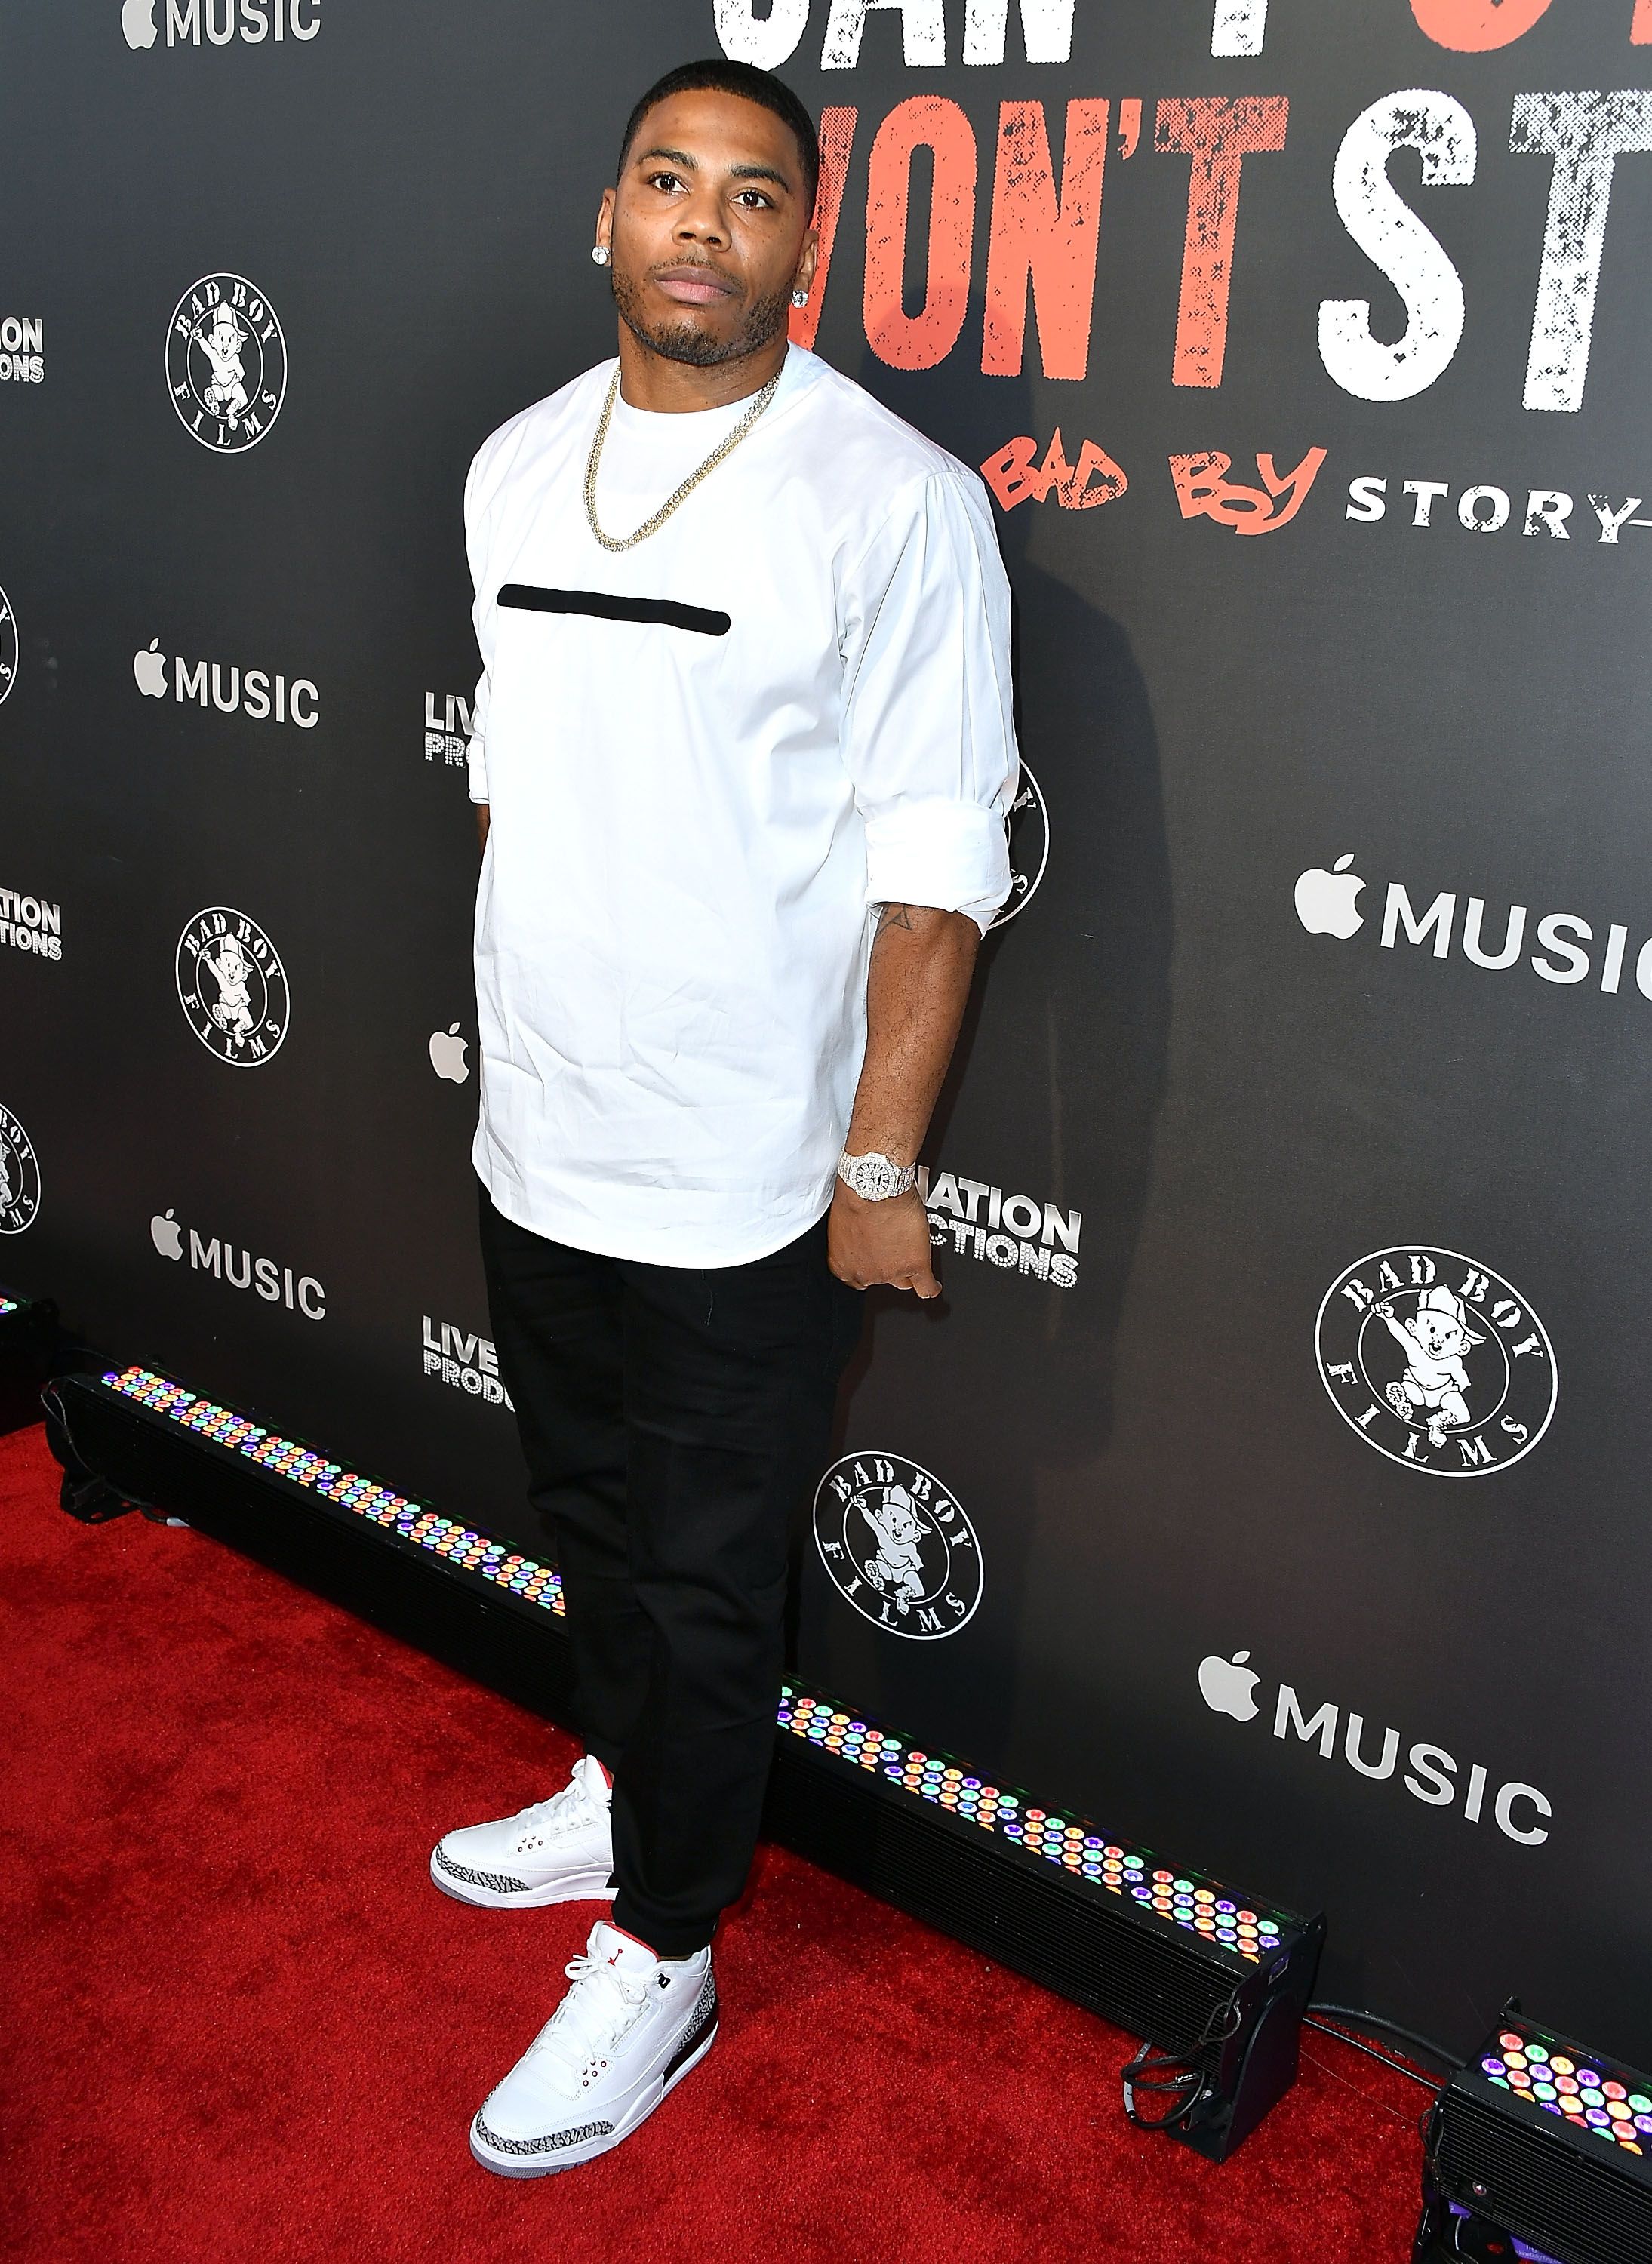 Nelly during the Los Angeles Premiere Of "Can't Stop Won't Stop" at Writers Guild of America, West on June 21, 2017 in Los Angeles, California. | Source: Getty Images